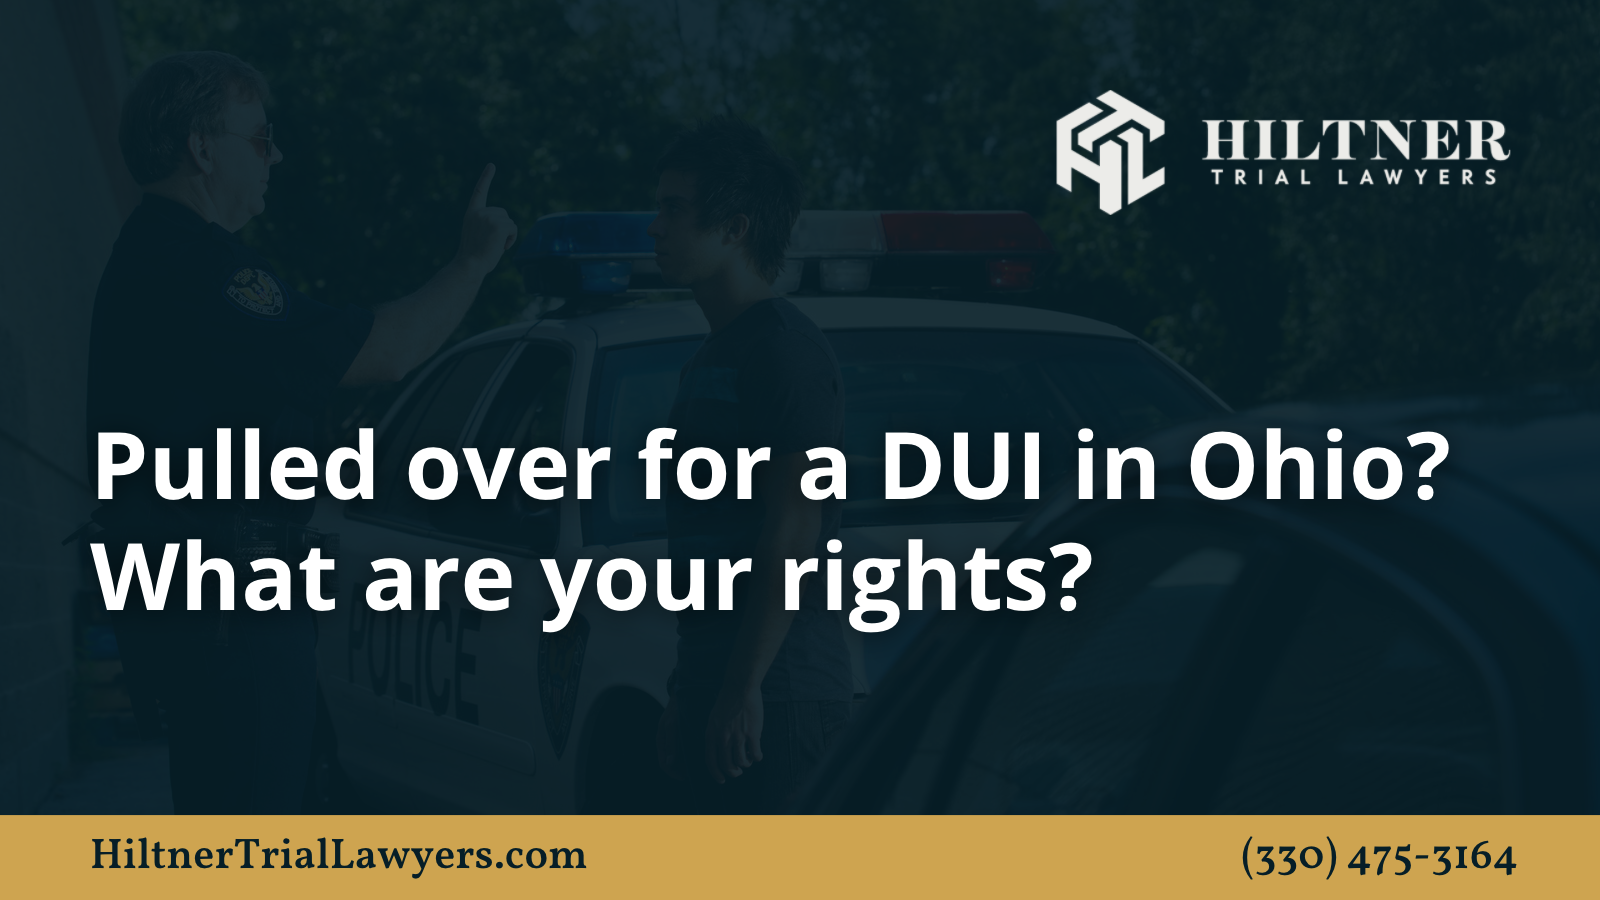 Pulled over for a DUI in Ohio - Hiltner Trial Lawyers Ohio - max hiltner